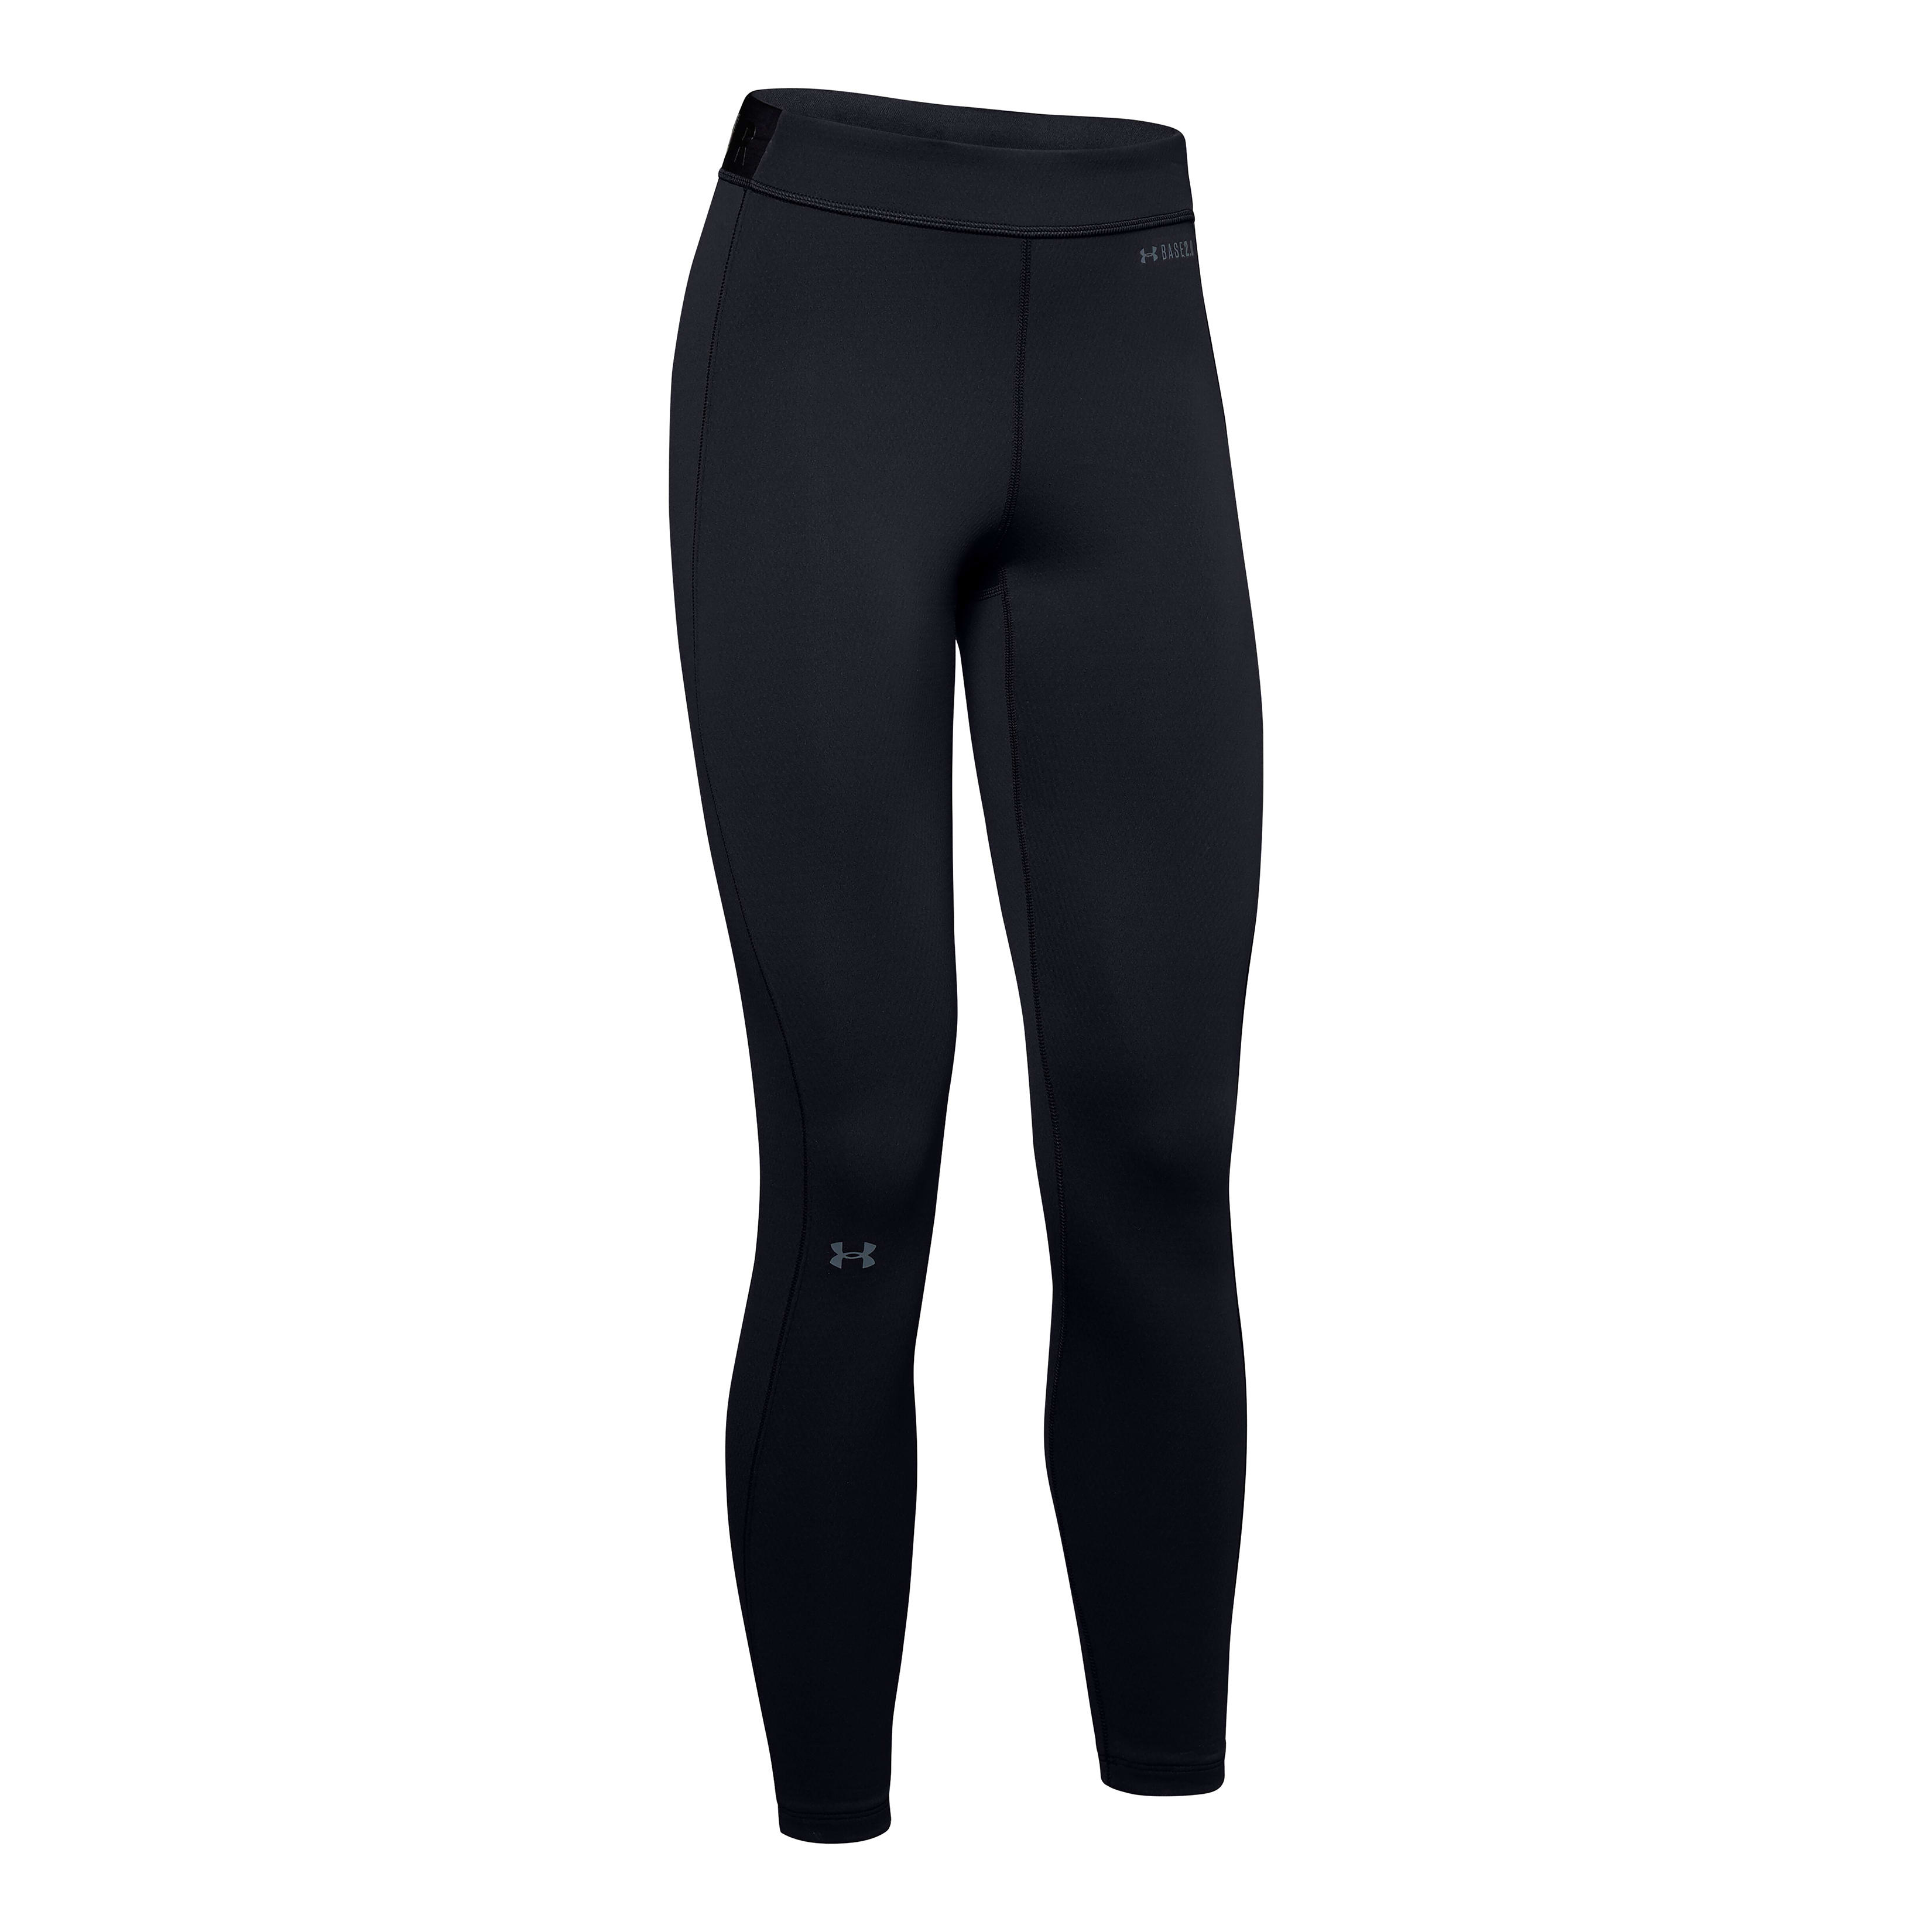 Under Armour® Women's Pure Stretch Hipster Bottom – 3-Pack